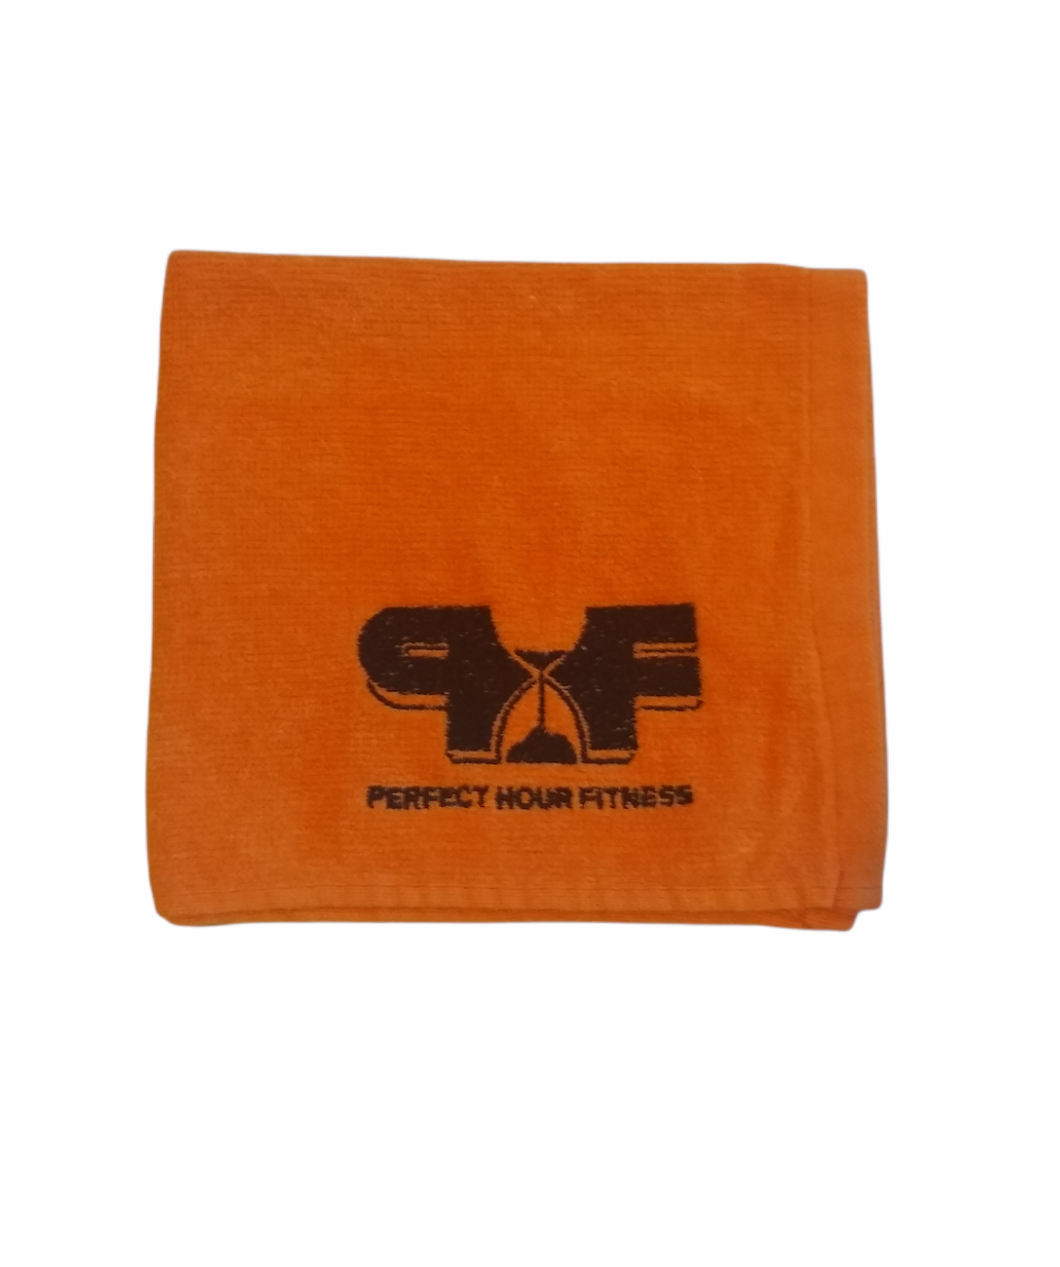 Perfect Hour Fitness Sports Towel